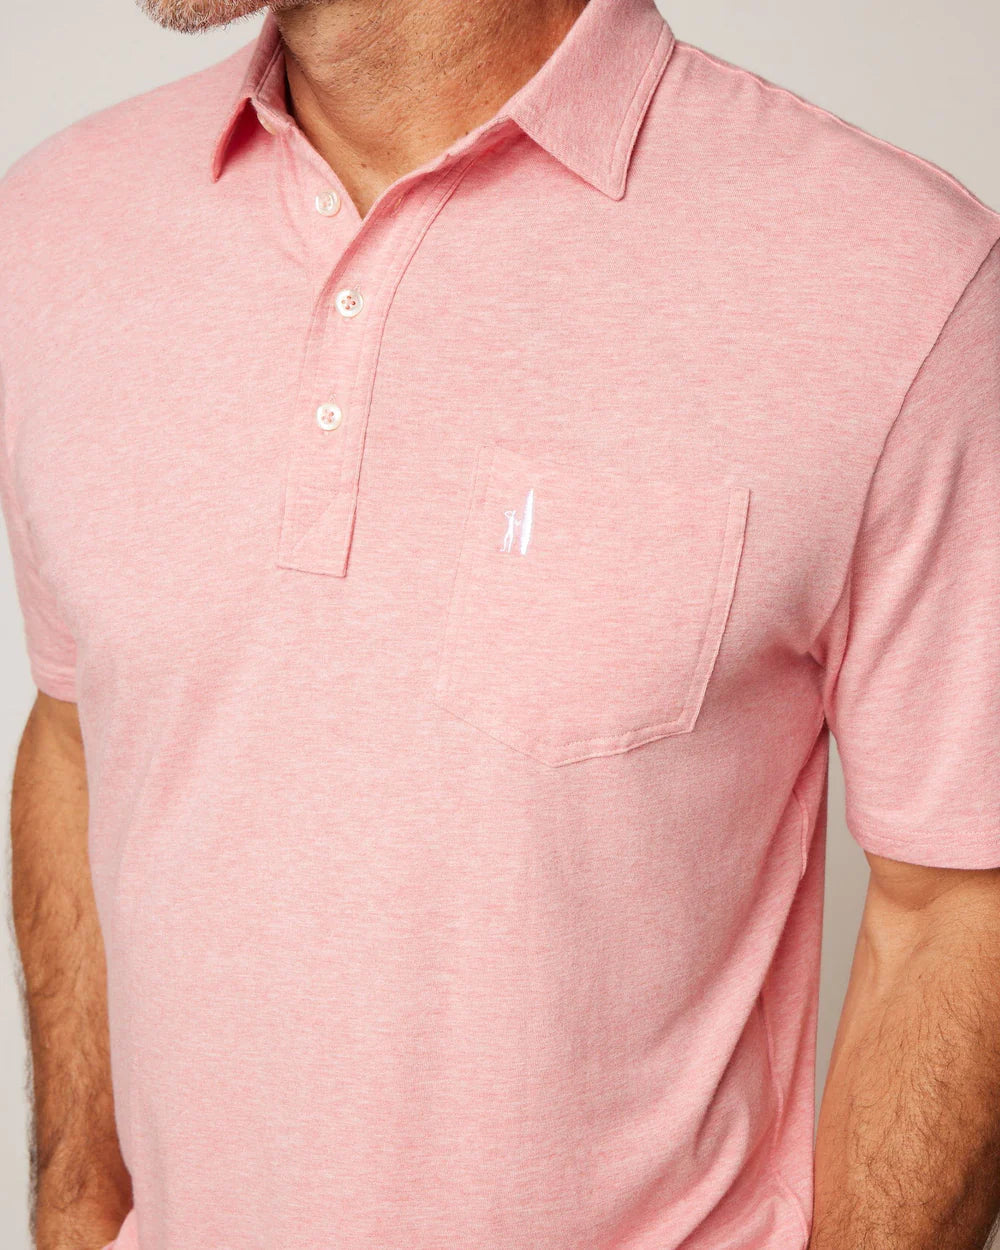 Our new Heathered Original 2.0 features a cotton, modal, and spandex fabric blend that's soft to the touch, stretchy, and nearly wrinkle free. An all around polo that will become a staple in rotation, this shirt is great year round and can be worn out to dinner under a layer or on it's own out in the sun.